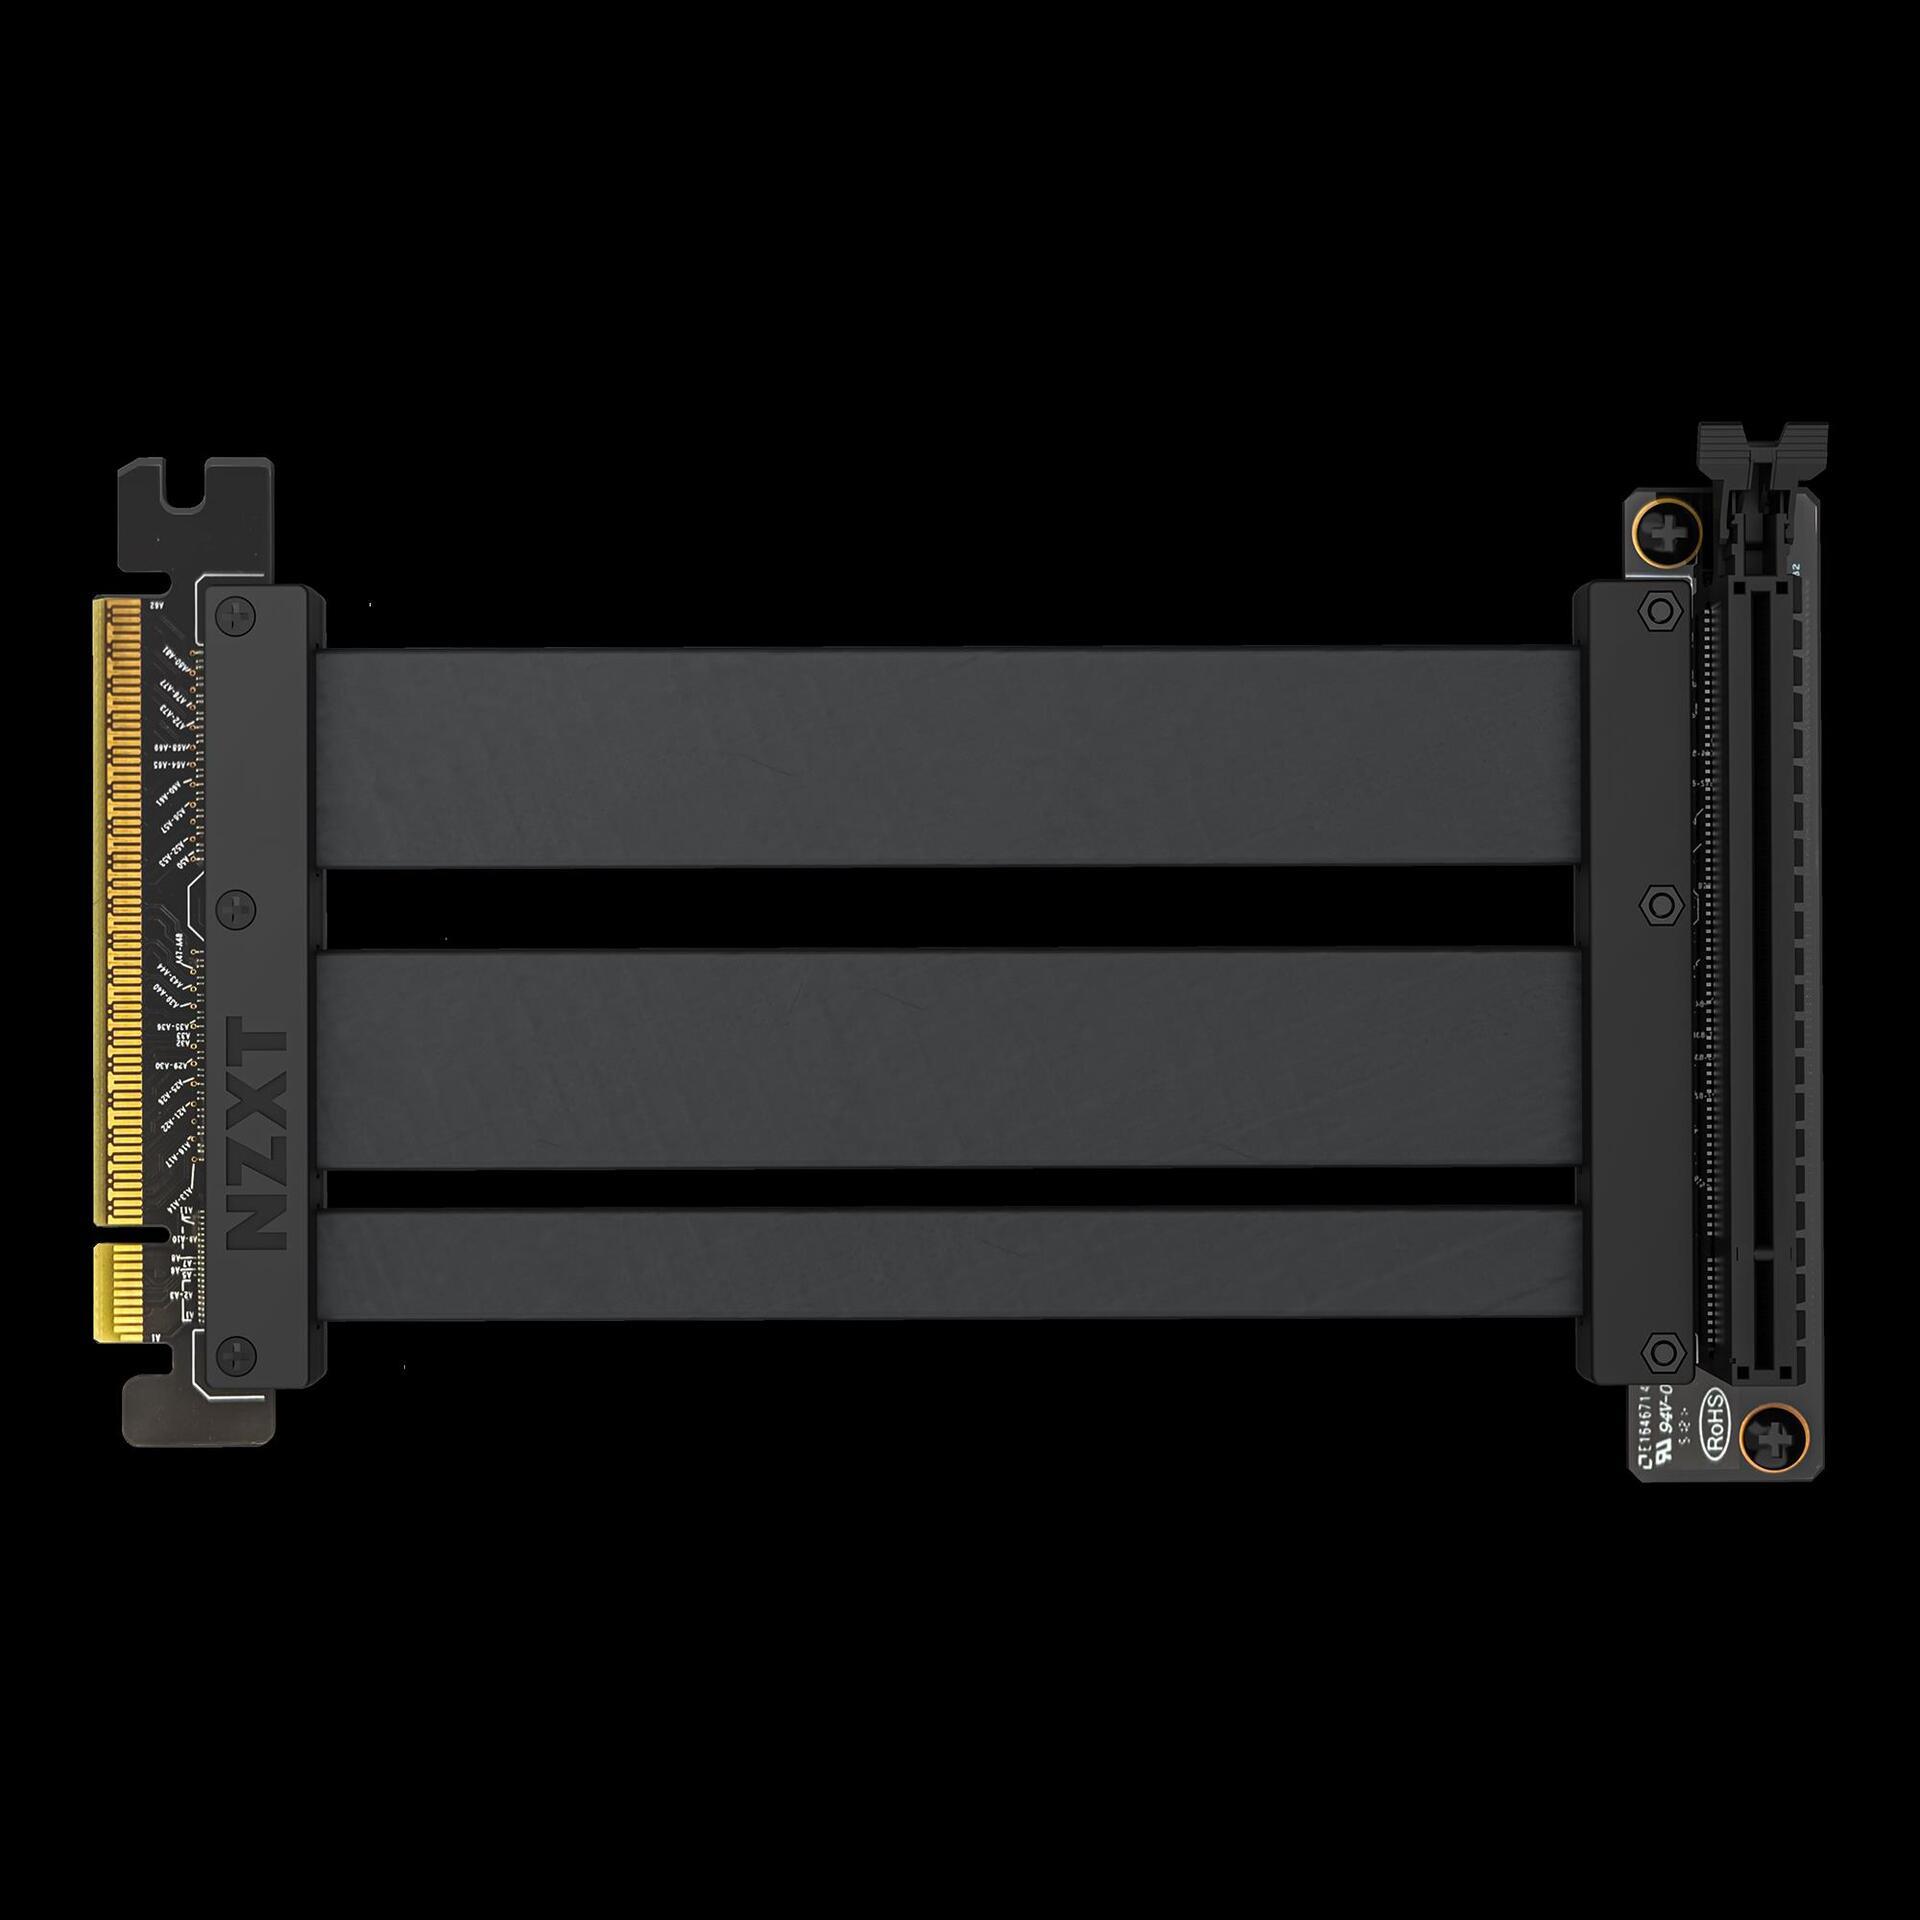 Nzxt PCIe 4.0x16 Riser Cable 200mm AB-RC200-B1